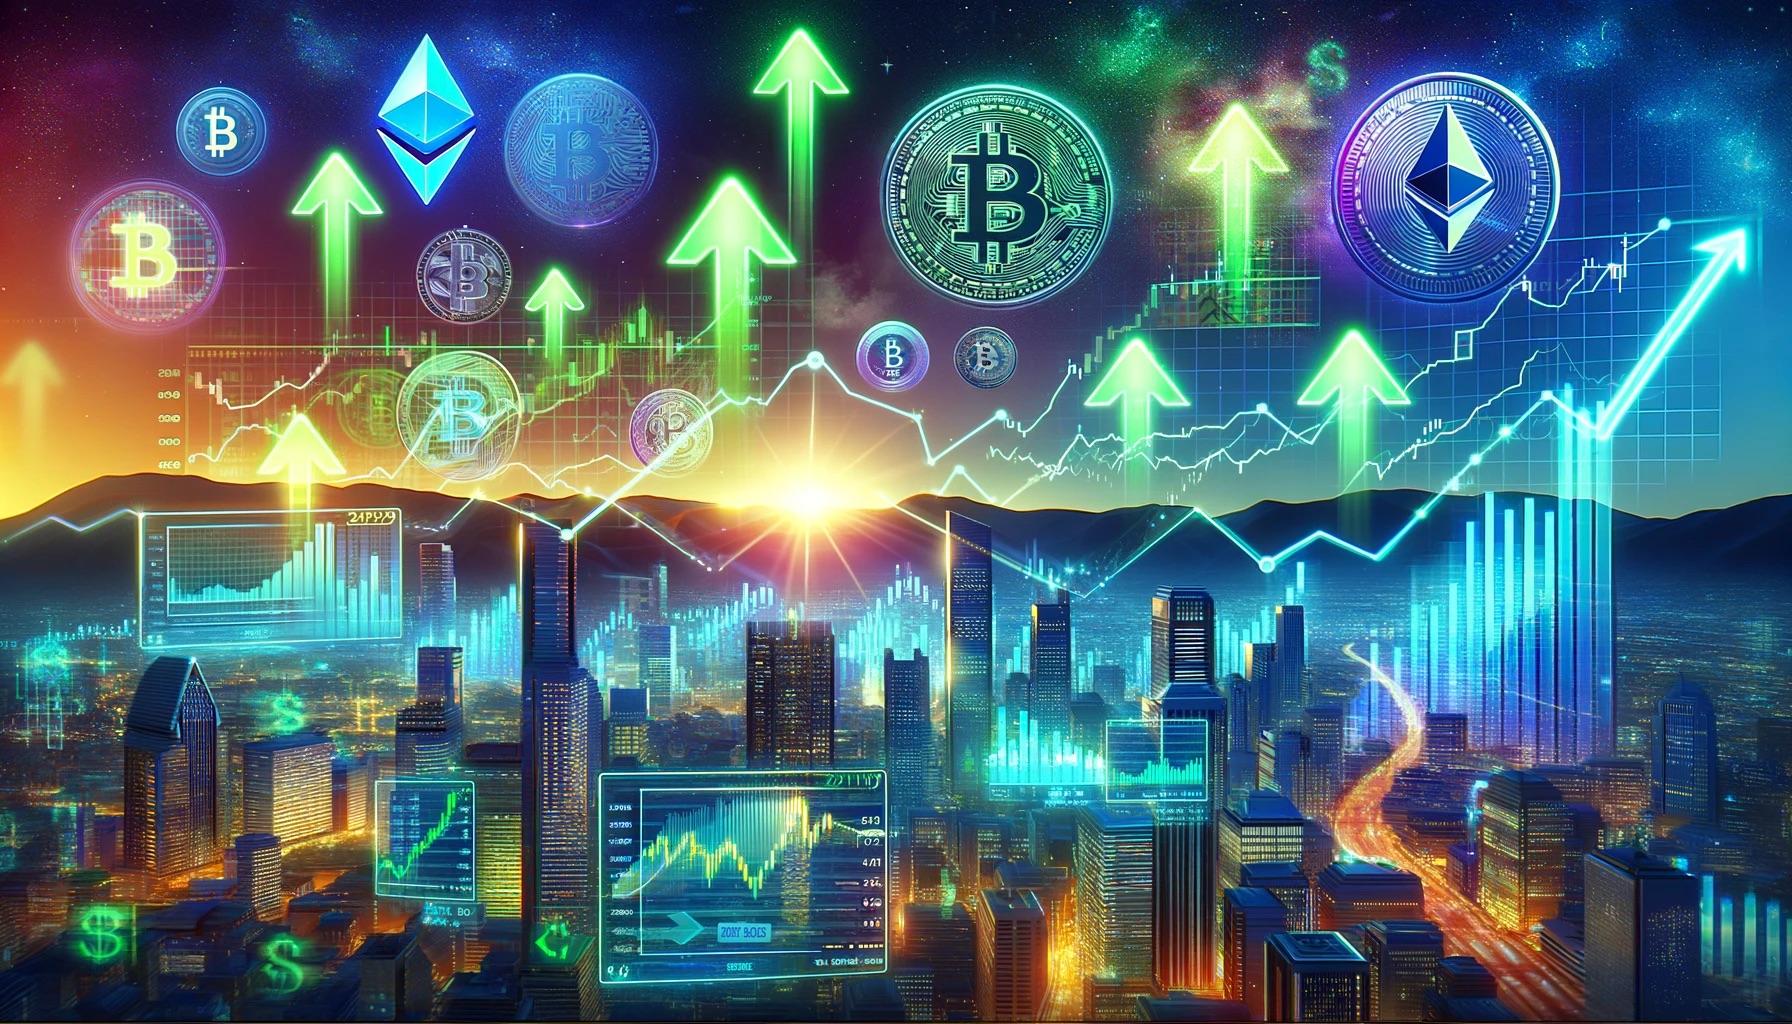 Crypto Expert Says Market Has Begun A Macro Bullish Expansion  What This Means For Bitcoin And Altcoin Prices